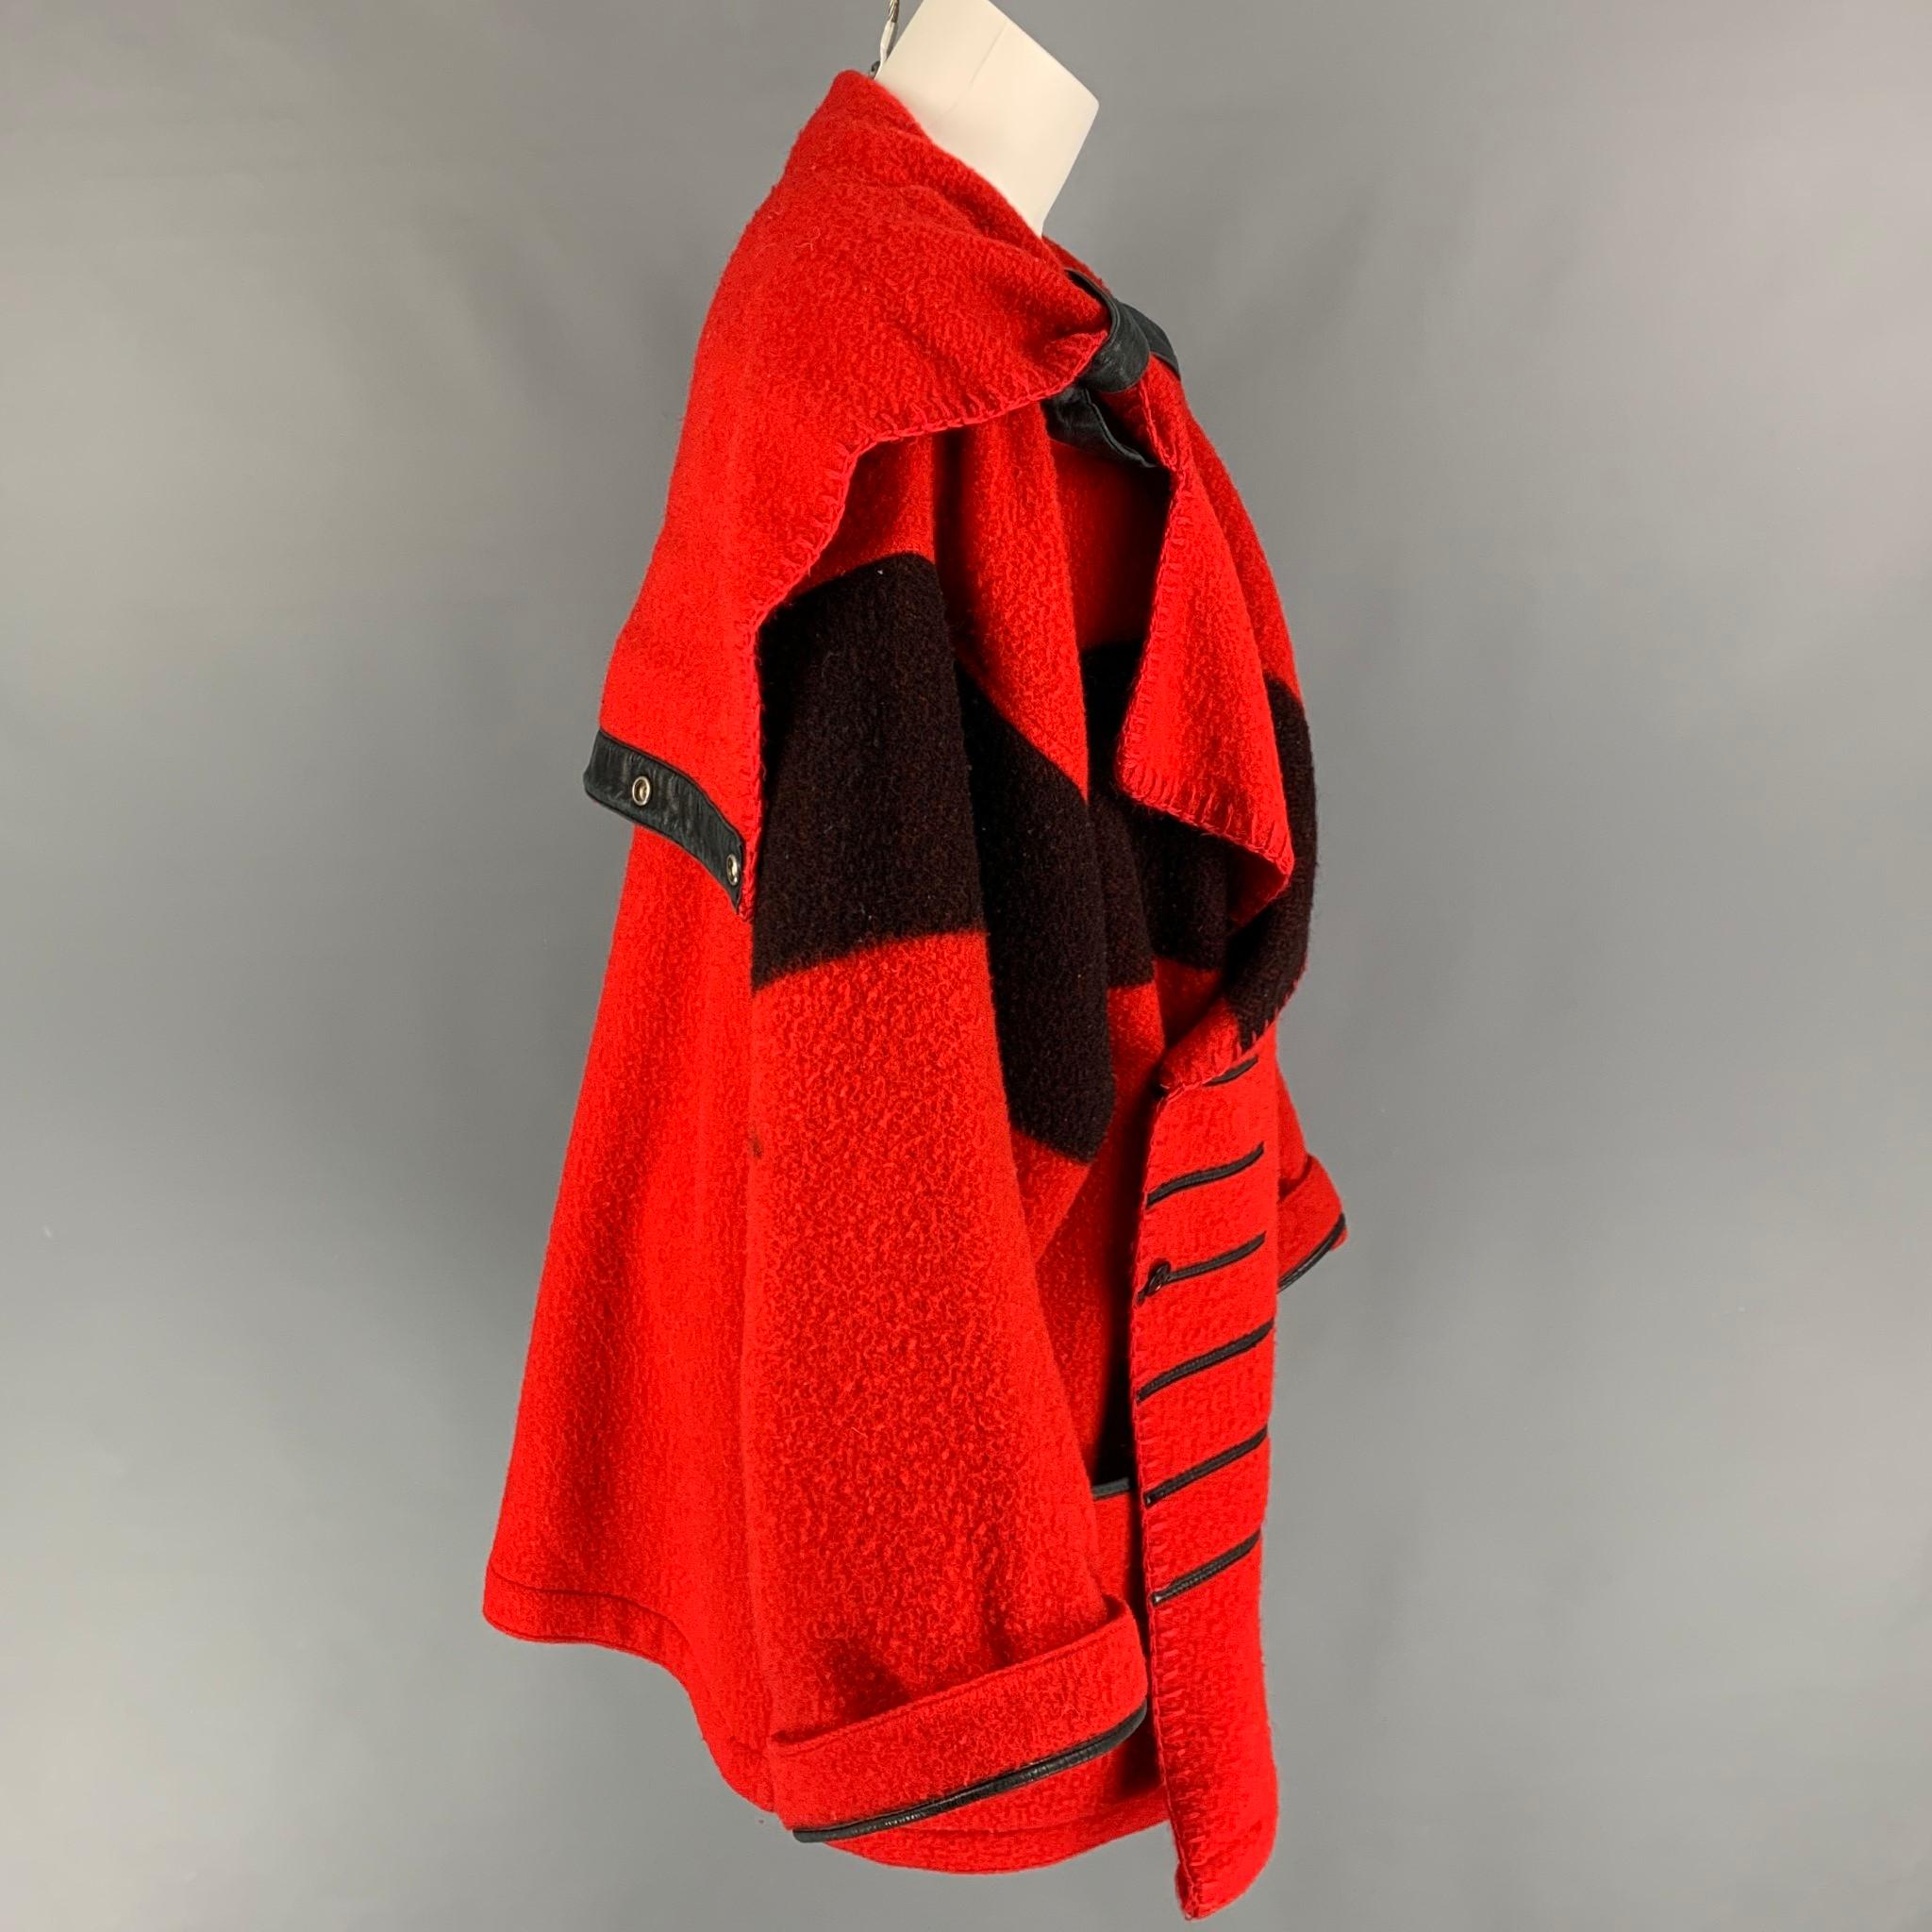 Vintage JEAN-CHARLES DE CASTELBAJAC coat comes in a red & black wool featuring a oversized fit, large lapel, leather trim, front pockets, and a double breasted closure. Made in France. 

Good Pre-Owned Condition.
Marked: Size tag